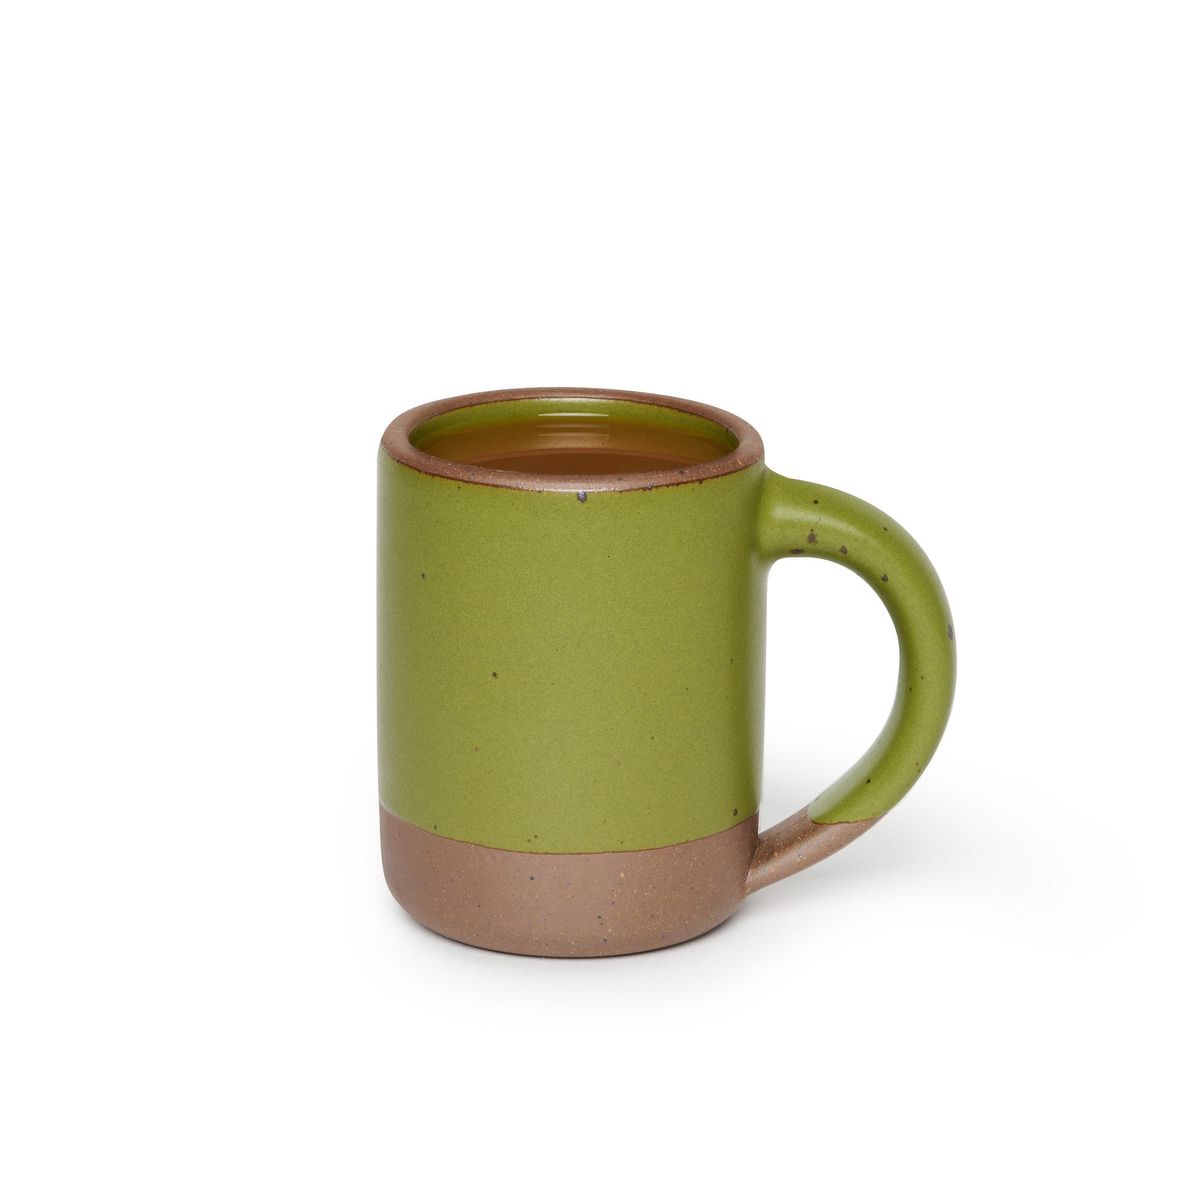 The Mug in Fiddlehead, a mossy, olive green, filled with coffee.